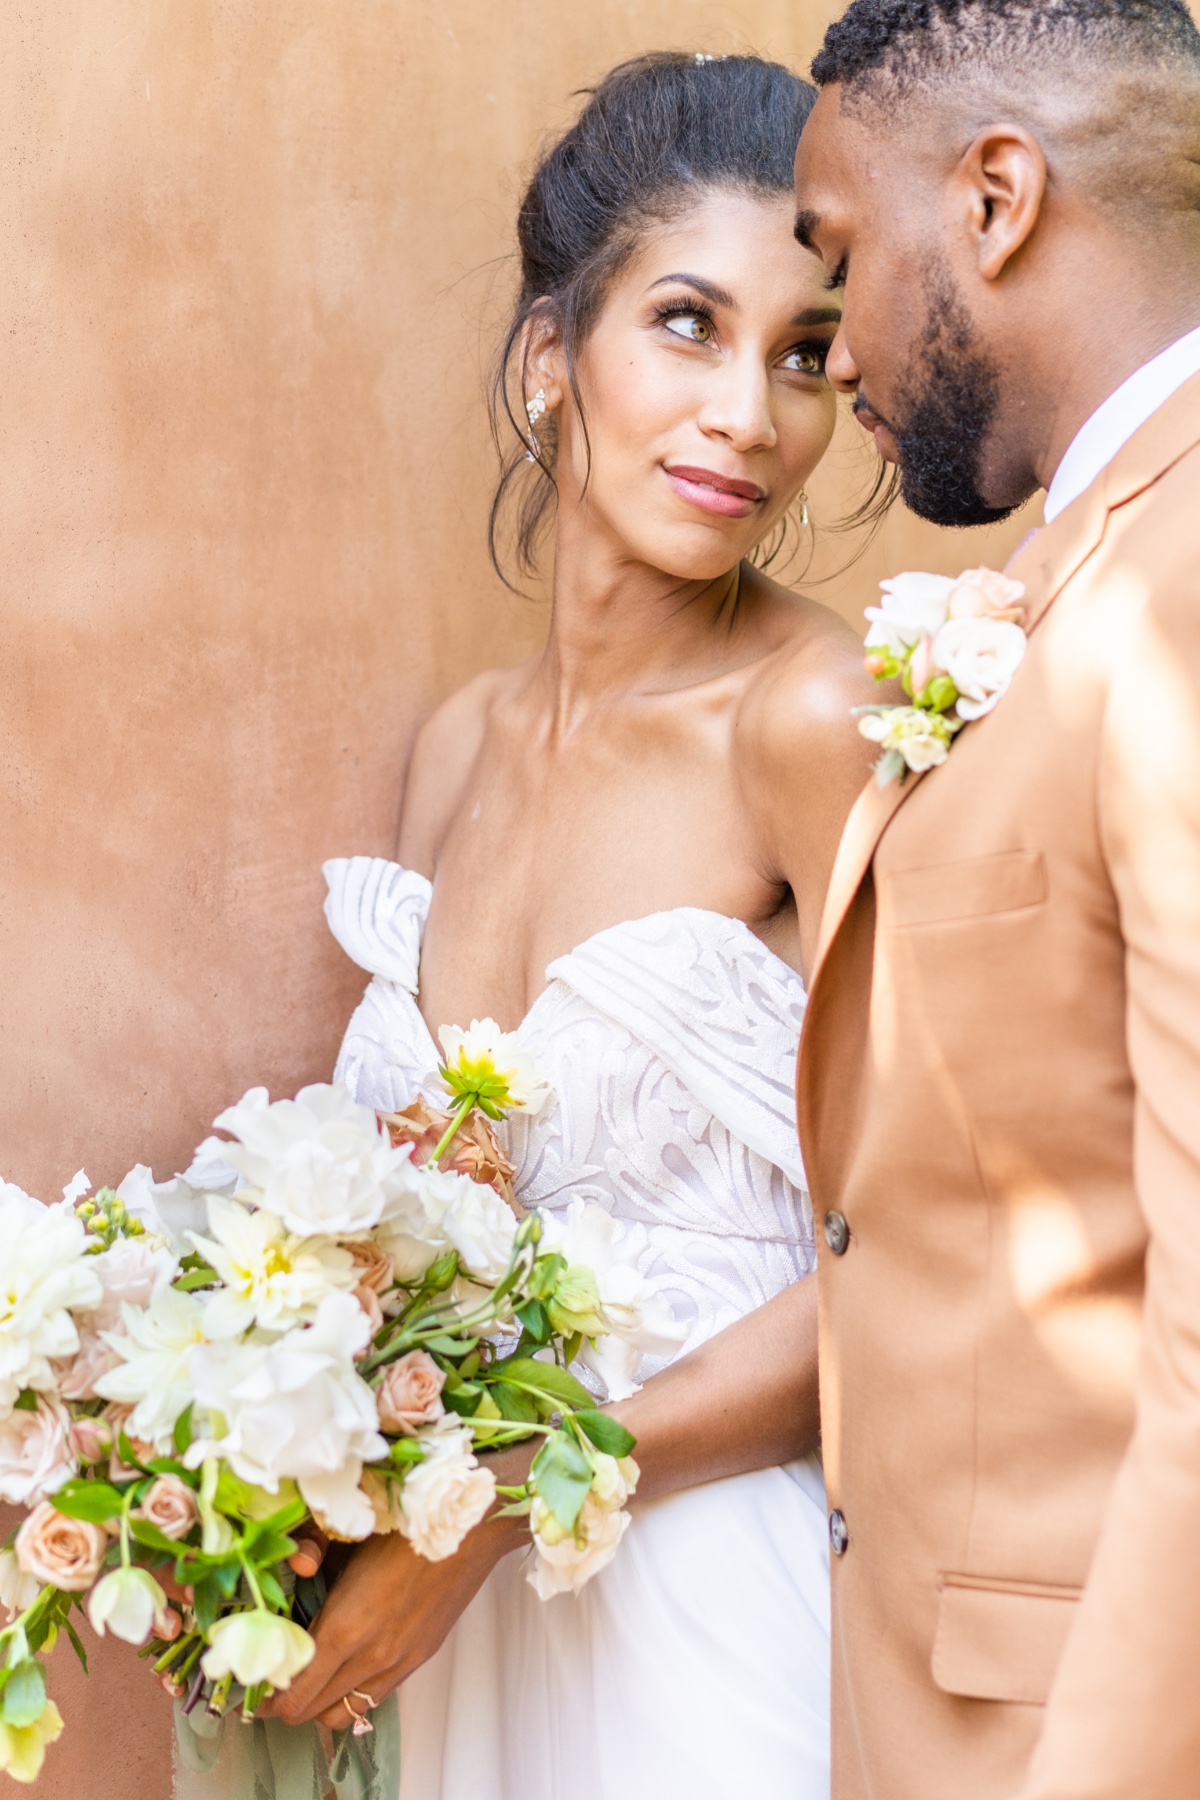 5 Tips for a Petite and Endlessly Beautiful Spring Wedding